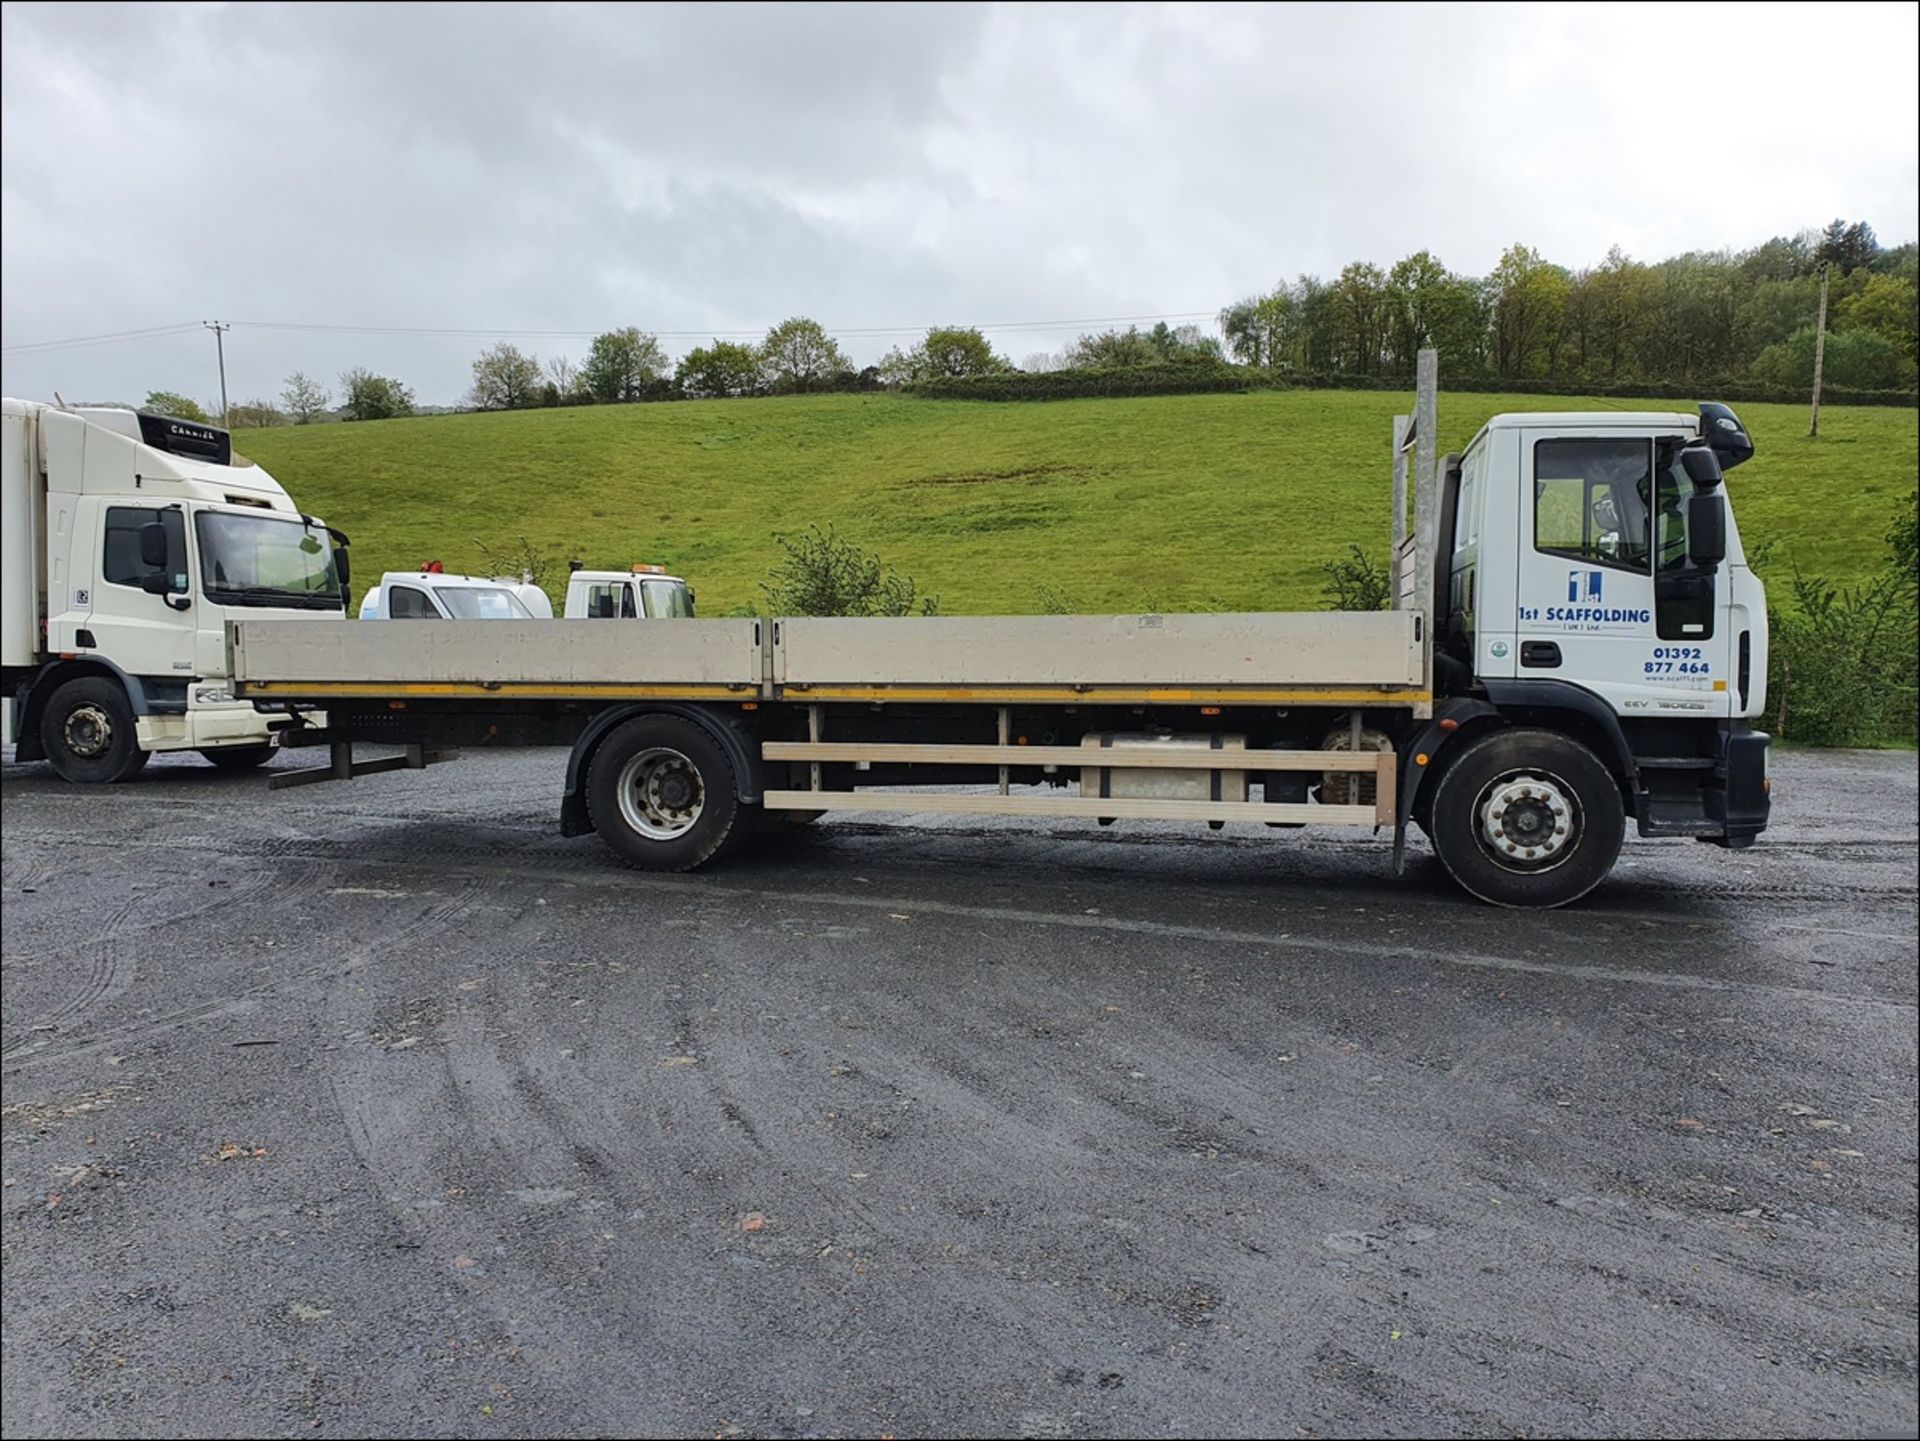 12/62 IVECO EUROCARGO (MY 2008) - 5880cc 2dr Flat Bed (White, 148k) - Image 5 of 16